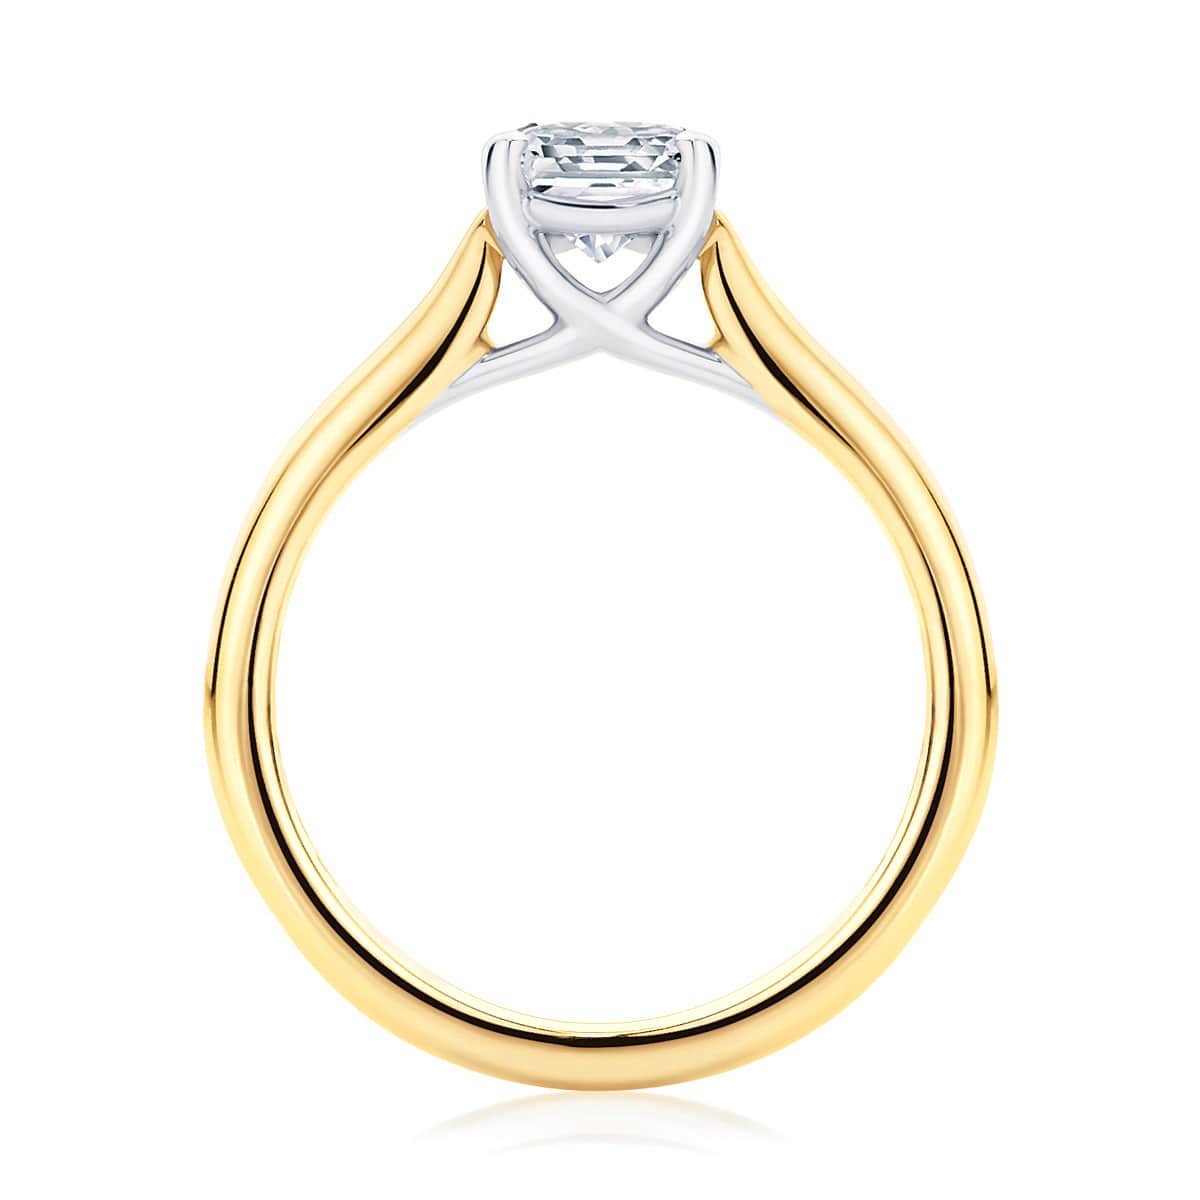 Emerald cut diamond engagement ring yellow gold solitaire